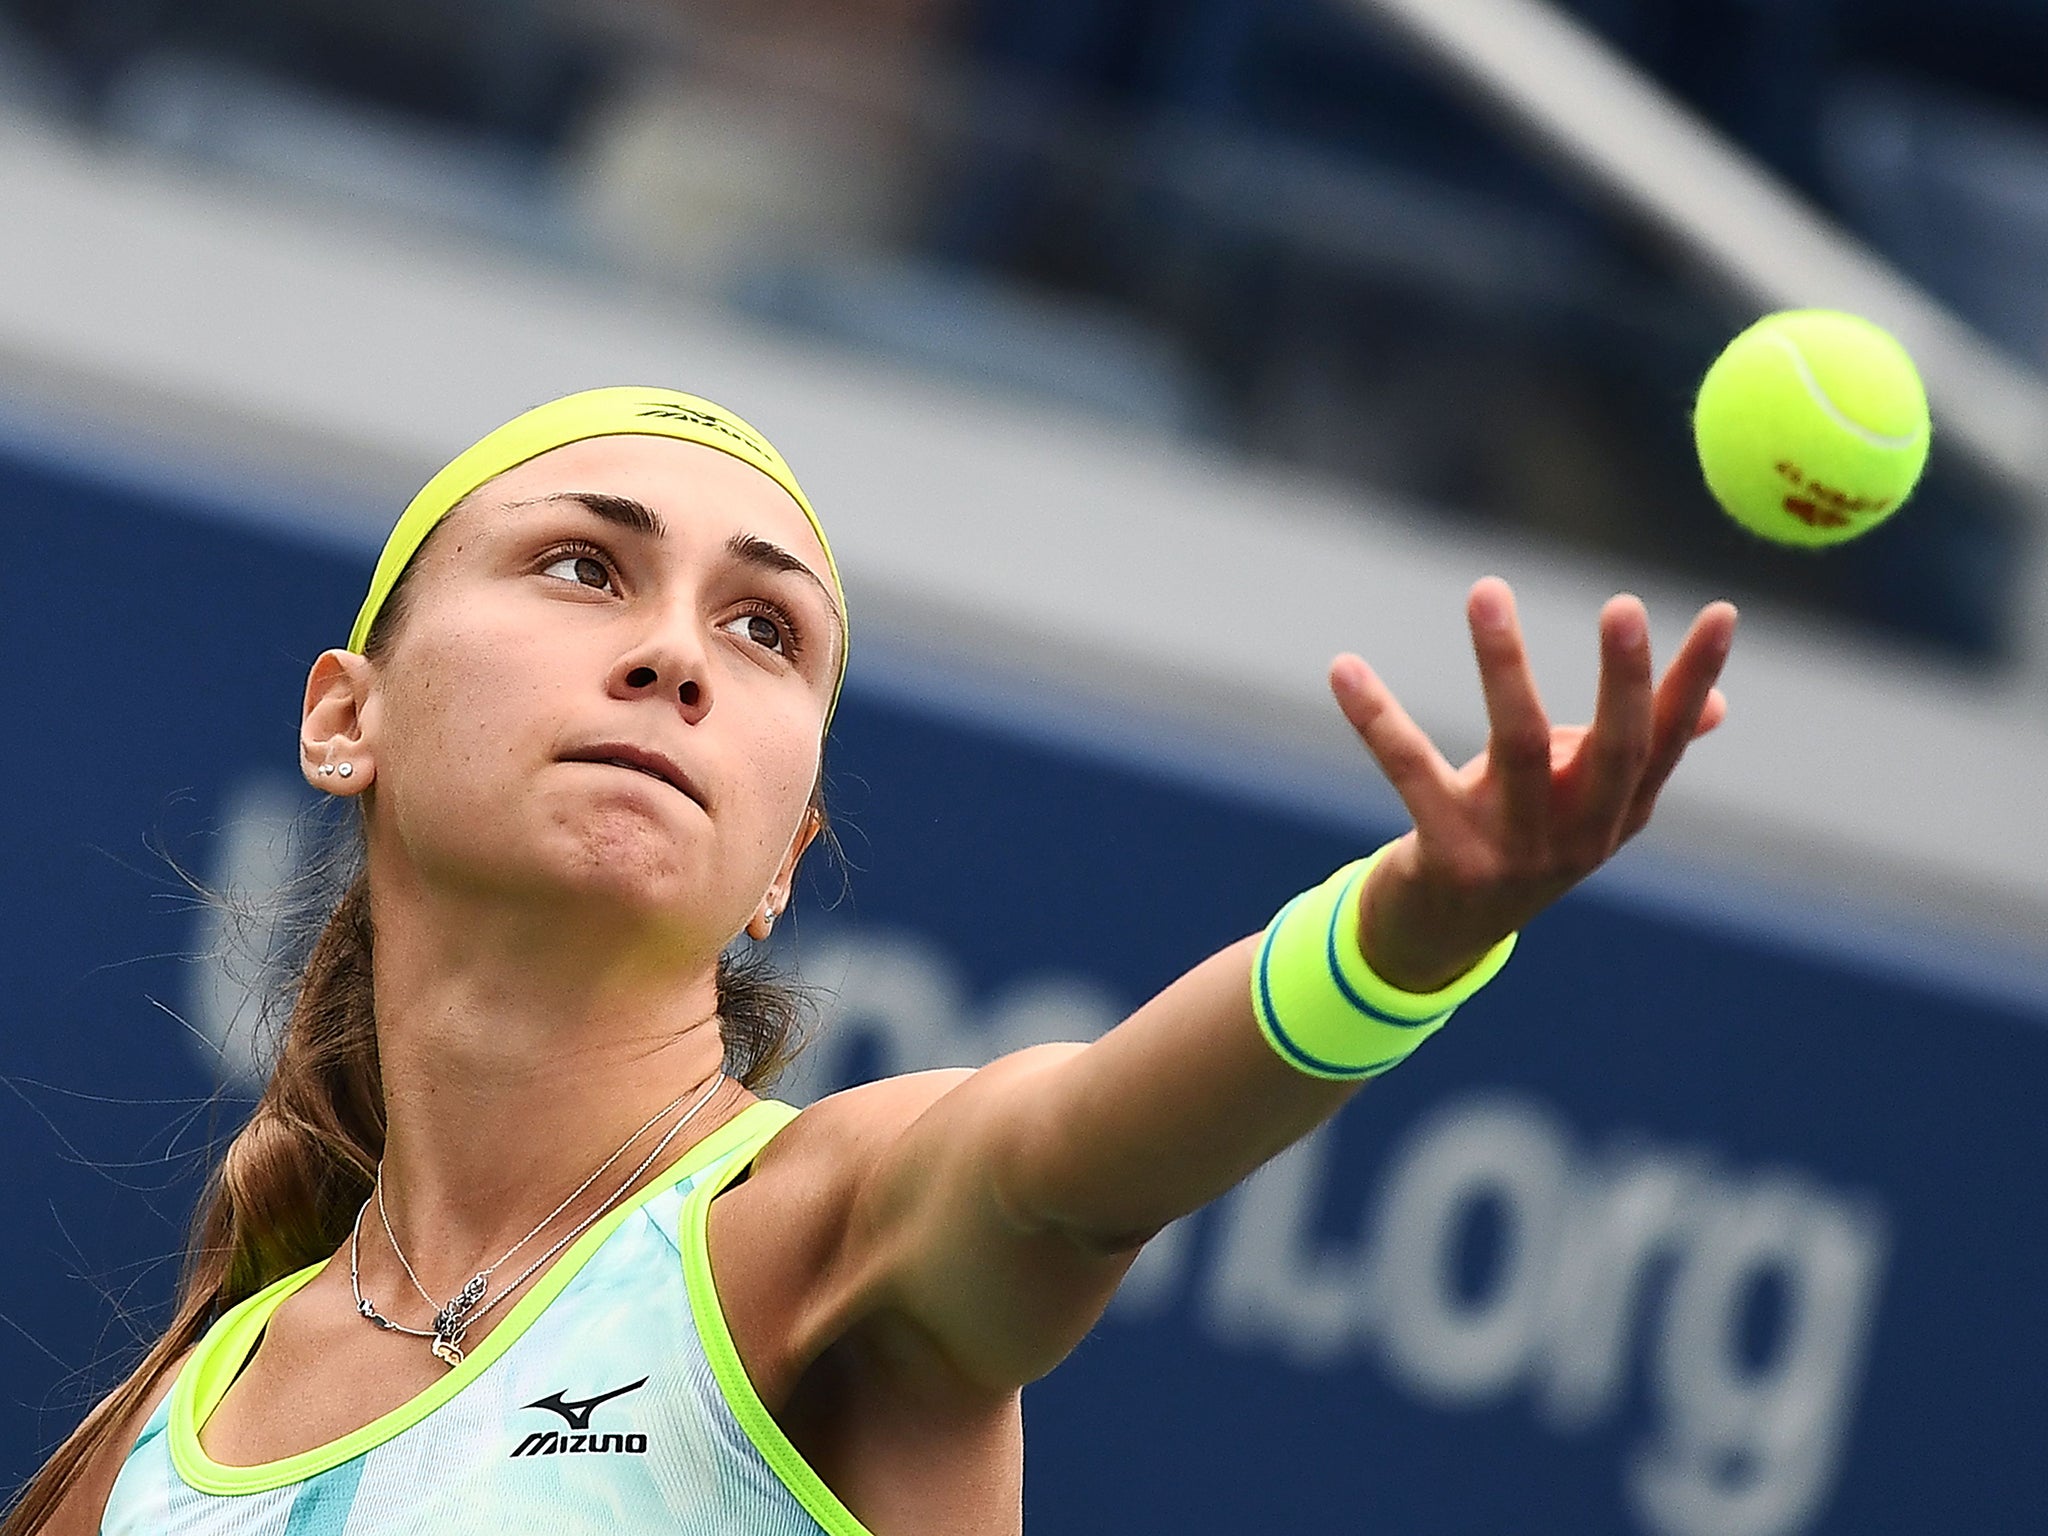 Krunic battled back from losing the first set to clinch a major victory